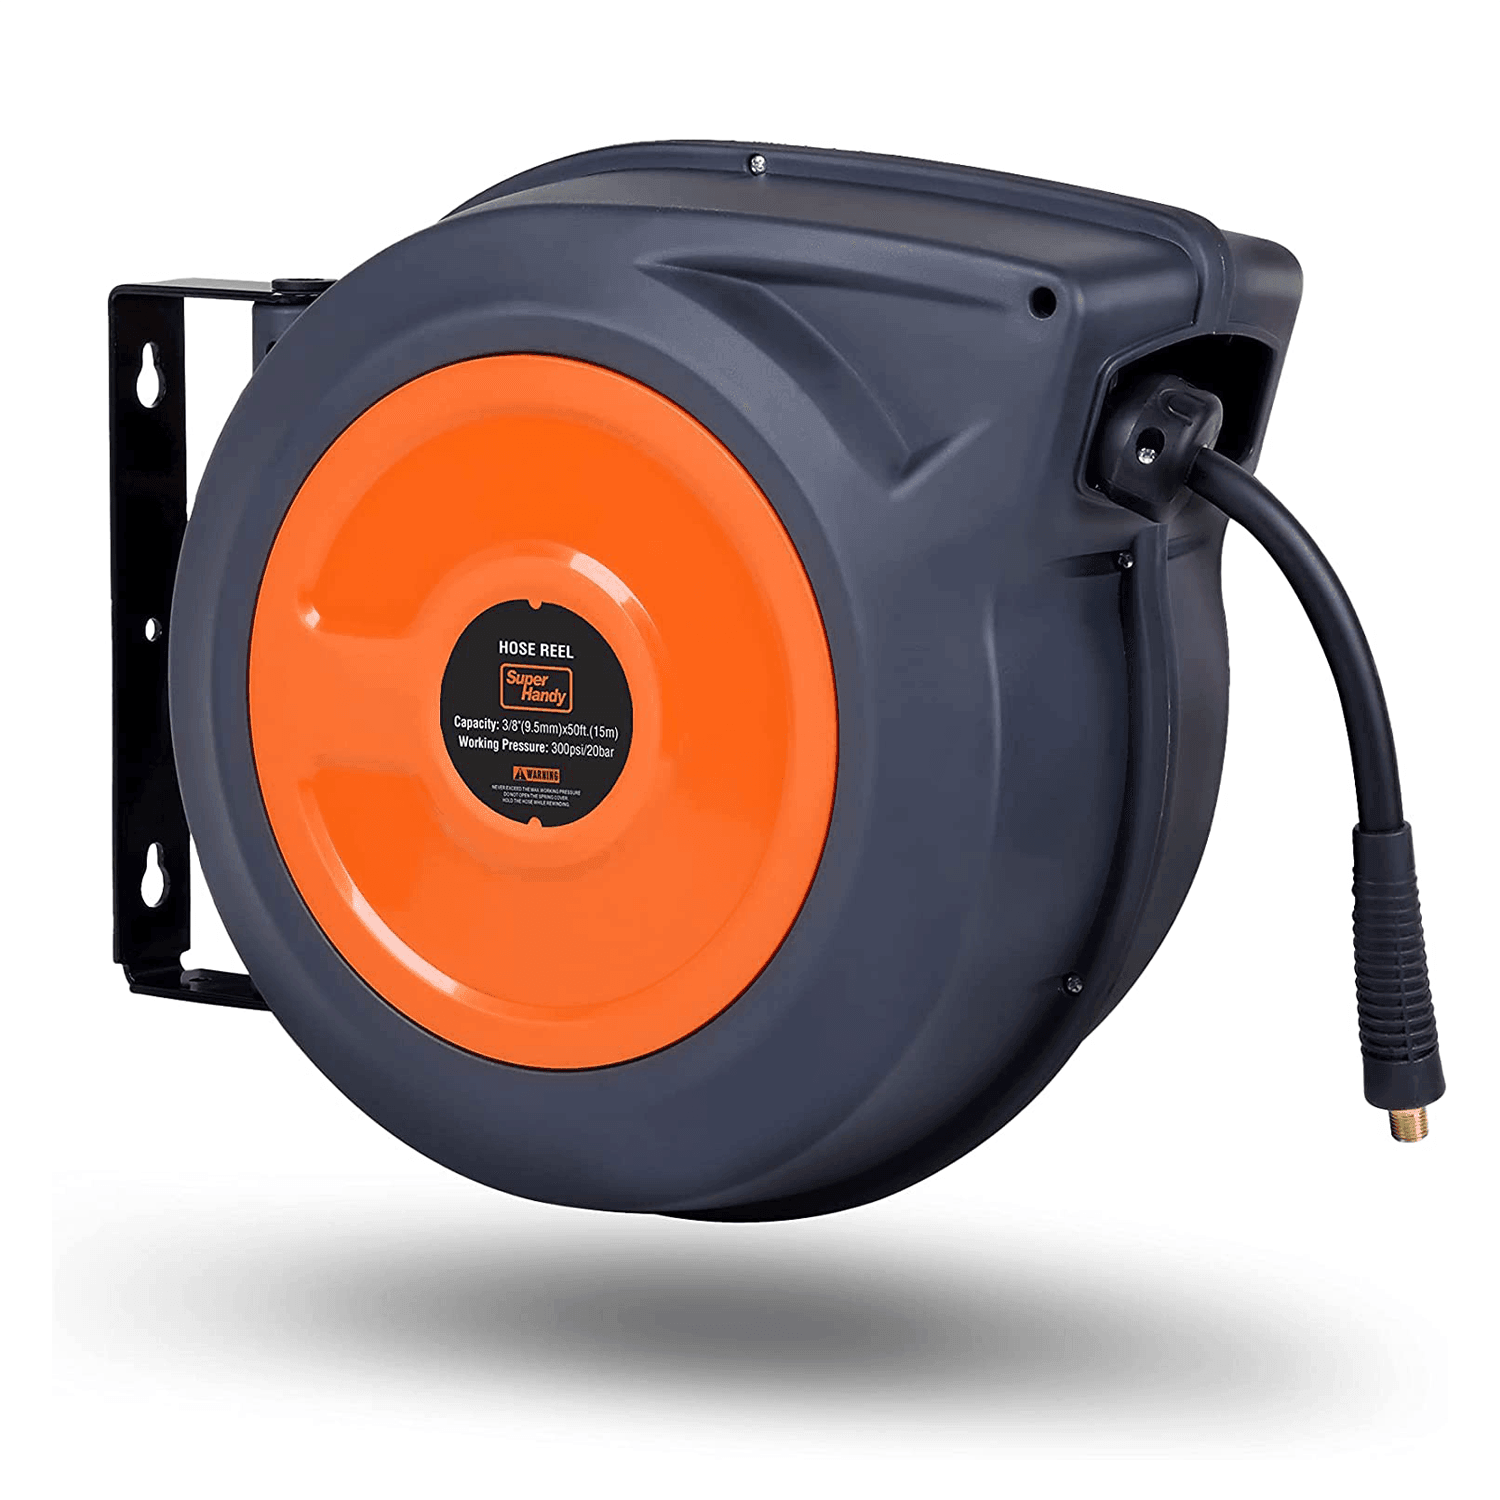 SuperHandy Mountable Retractable Air Hose Reel - 3/8" x 50'FT, 3' Ft Lead-In Hose, 1/4" MNPT Connections - DIY Tools by GreatCircleUS